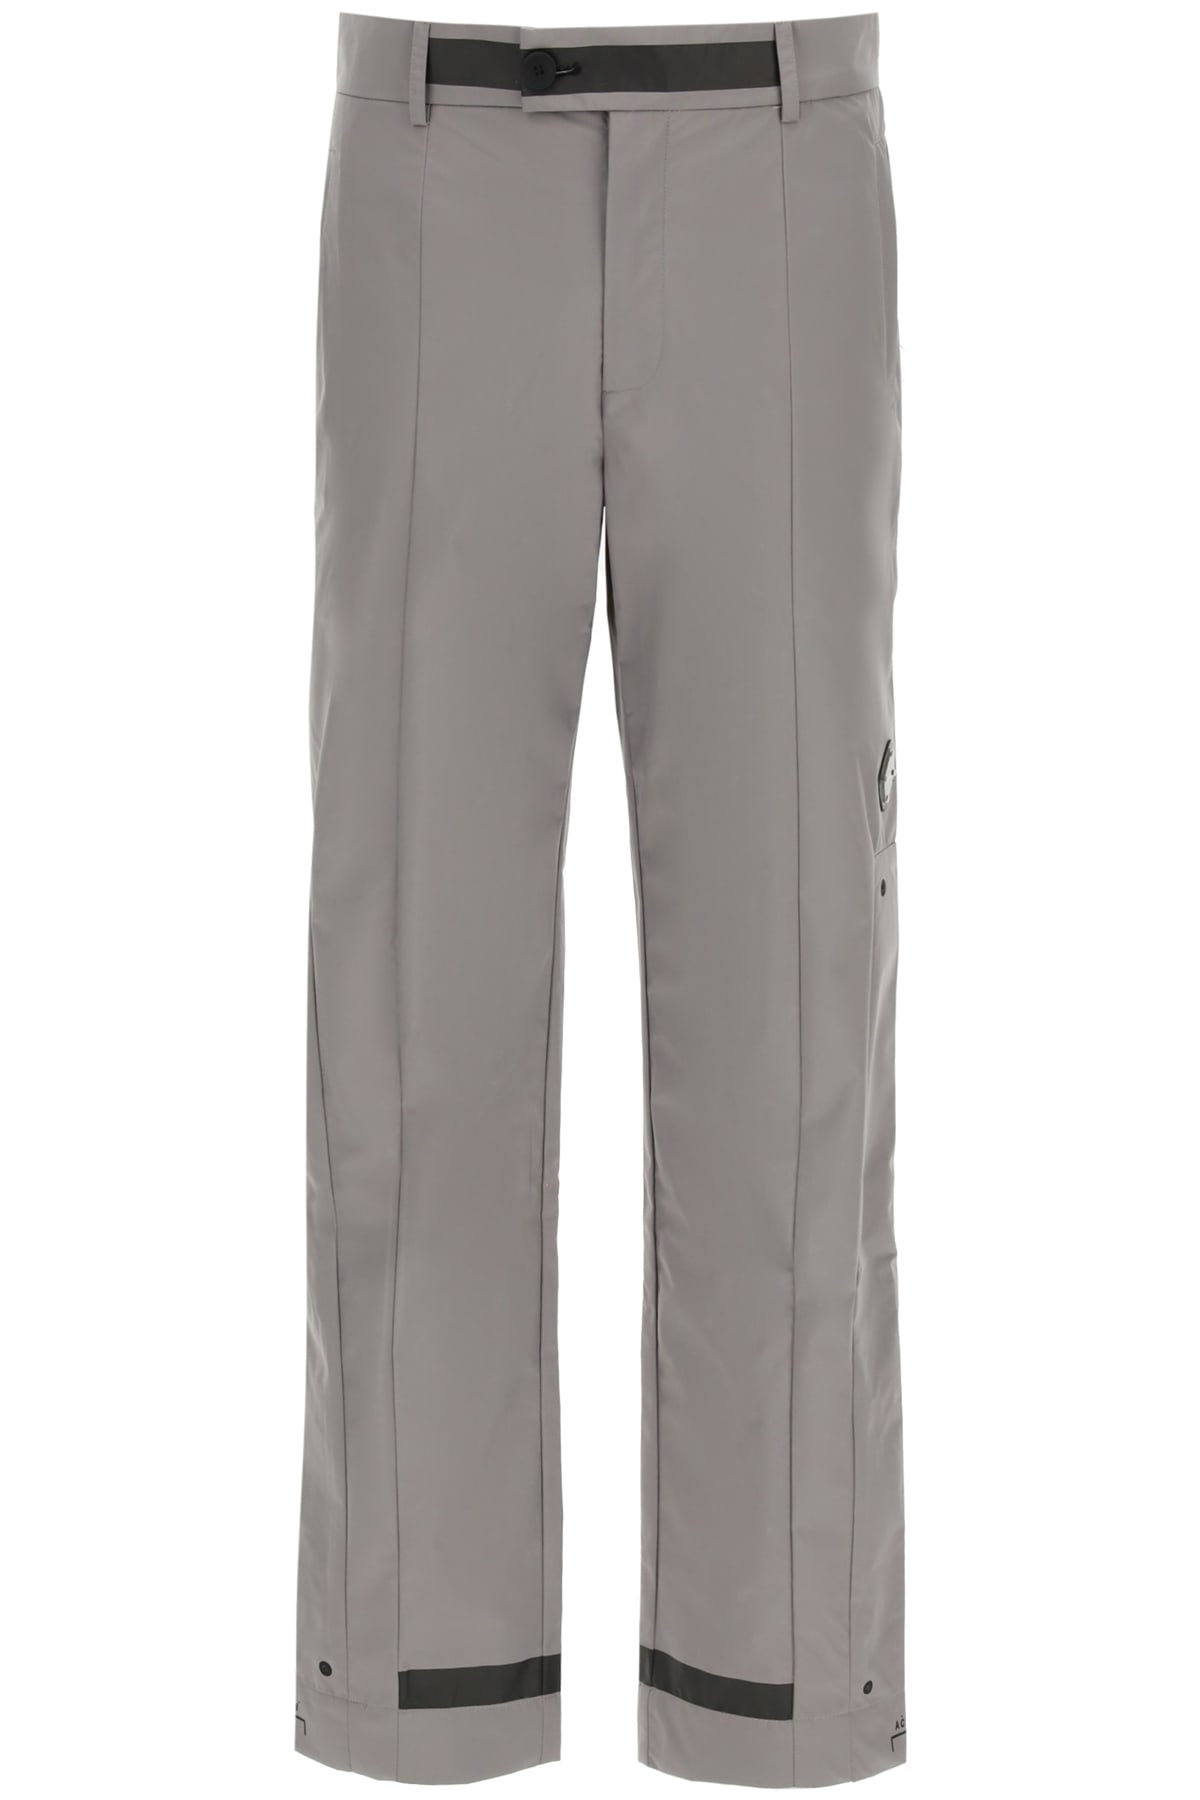 A-COLD-WALL* ESSENTIAL TECHNICAL TROUSERS,ACWMB047 FLINT